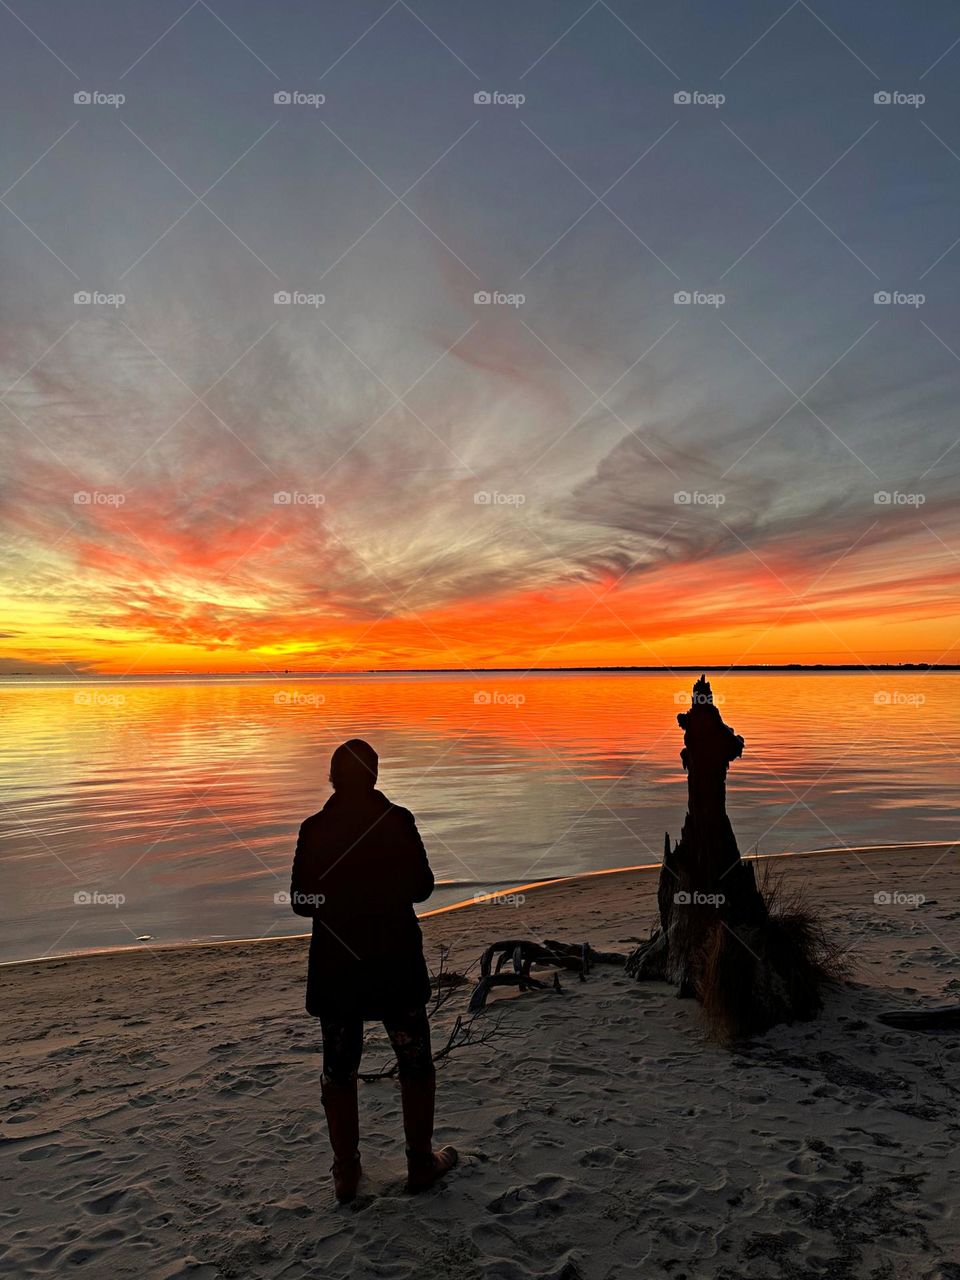 Magic of the Sunset - A young lady photographs sunset. The radiance of the beautIful peach colored sky from the descending sunset was glorious to behold and increasing every moment in splendor. 